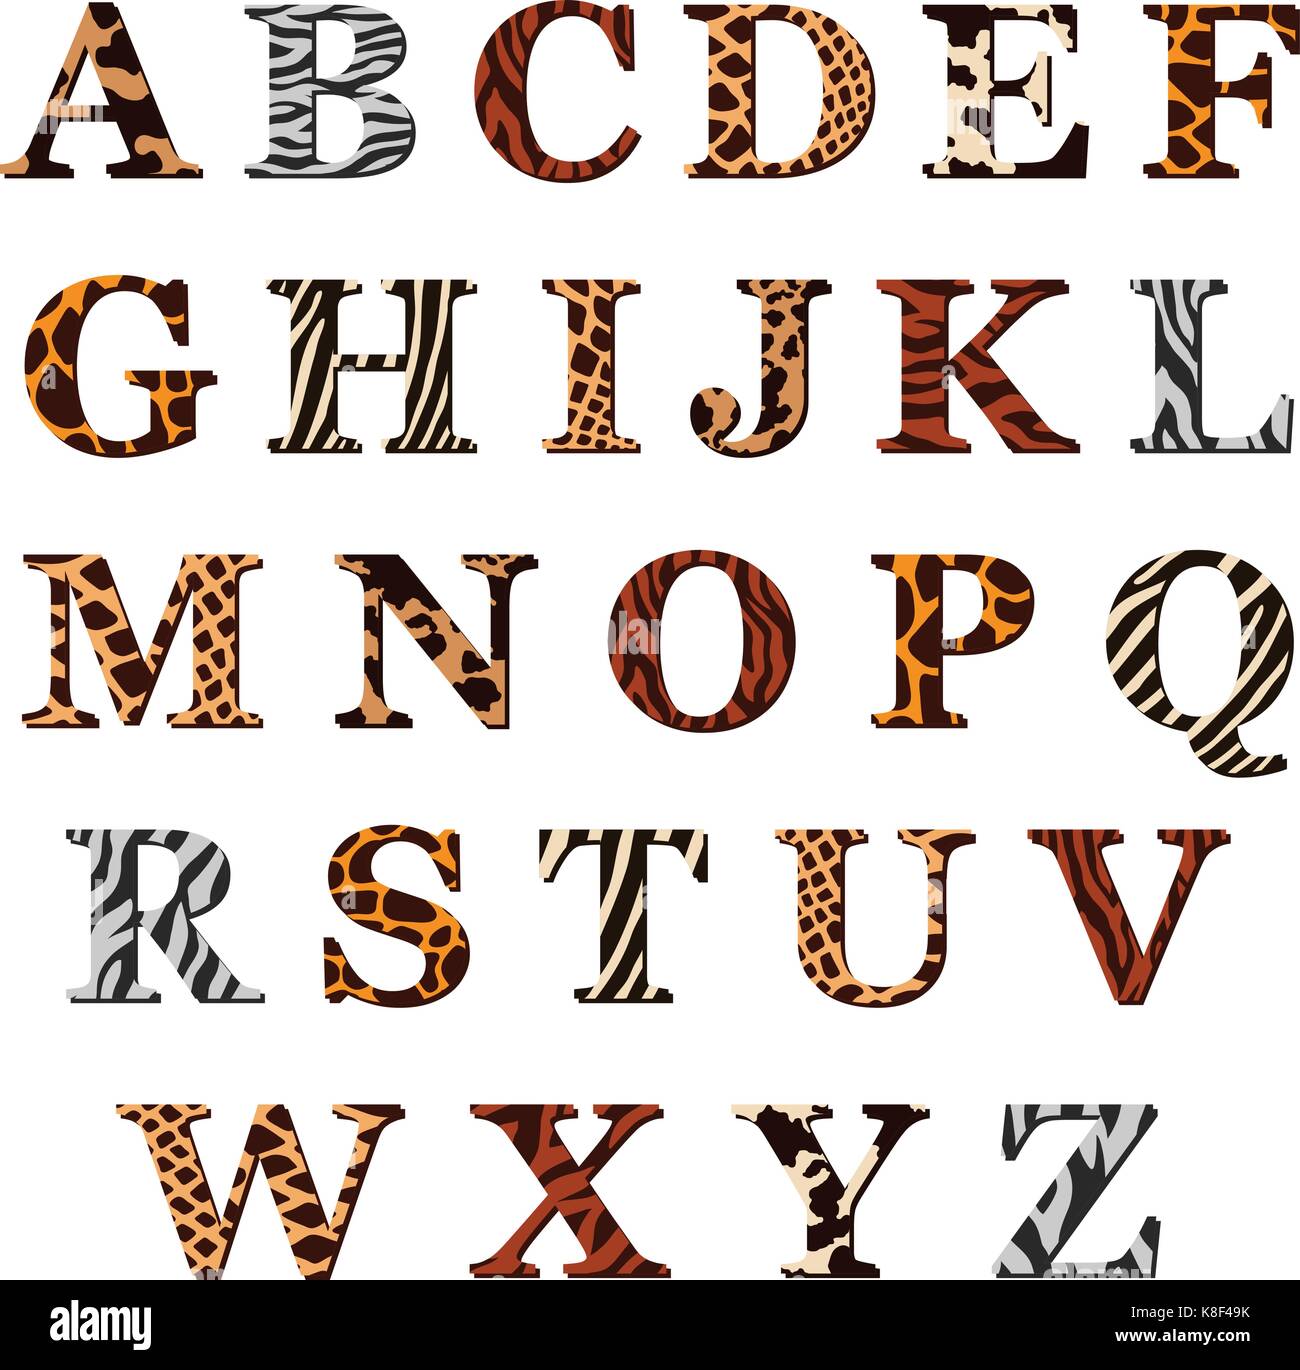 Vector capital letters of the Latin alphabet with animal print